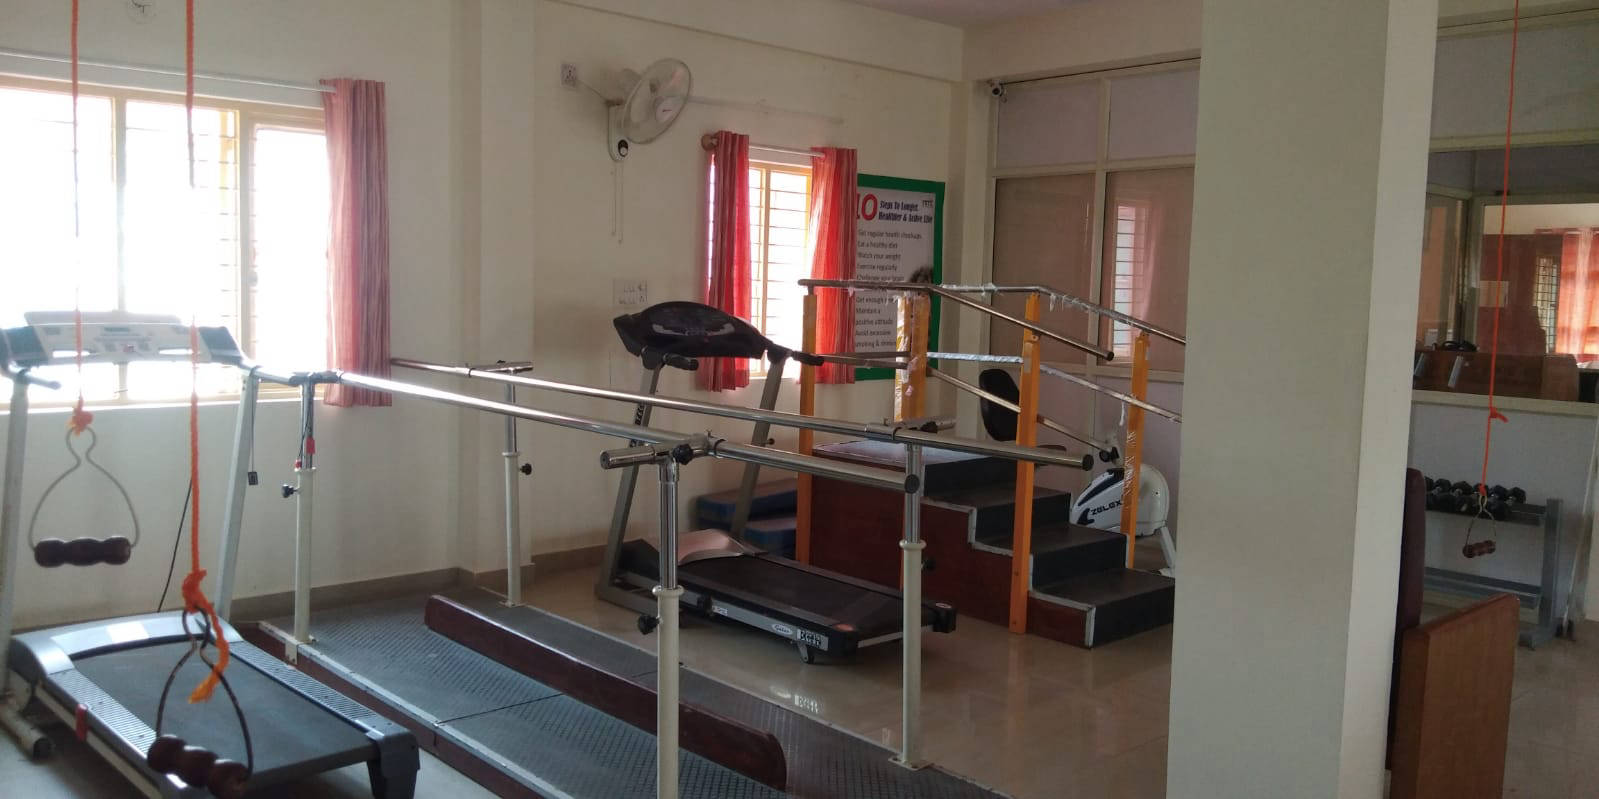 Another look at the Physical Exercise Equipment at the Day Care Centre